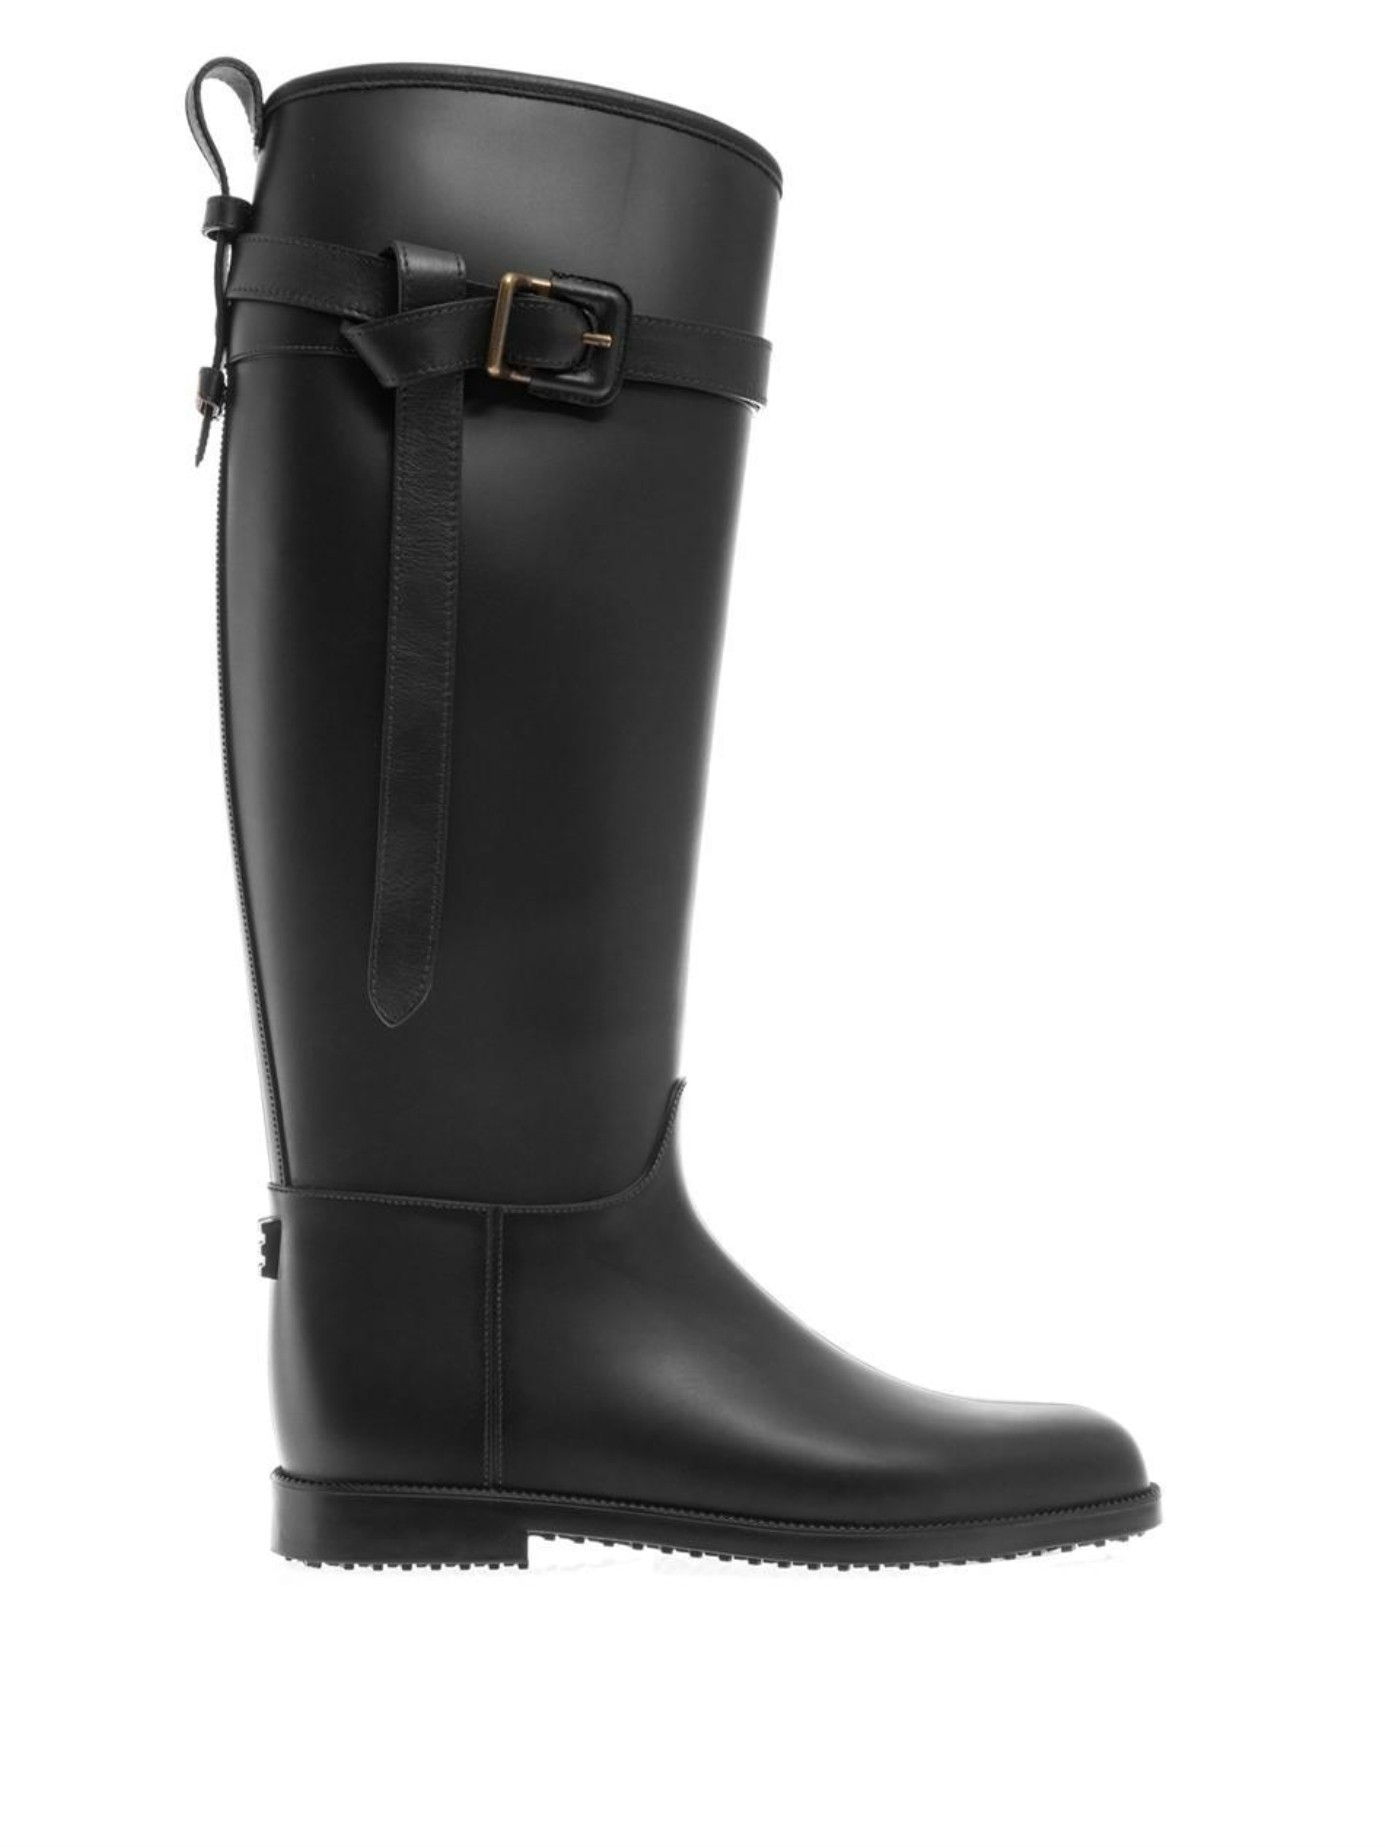 Lyst - Burberry Belted Equestrian Rain Boots in Black